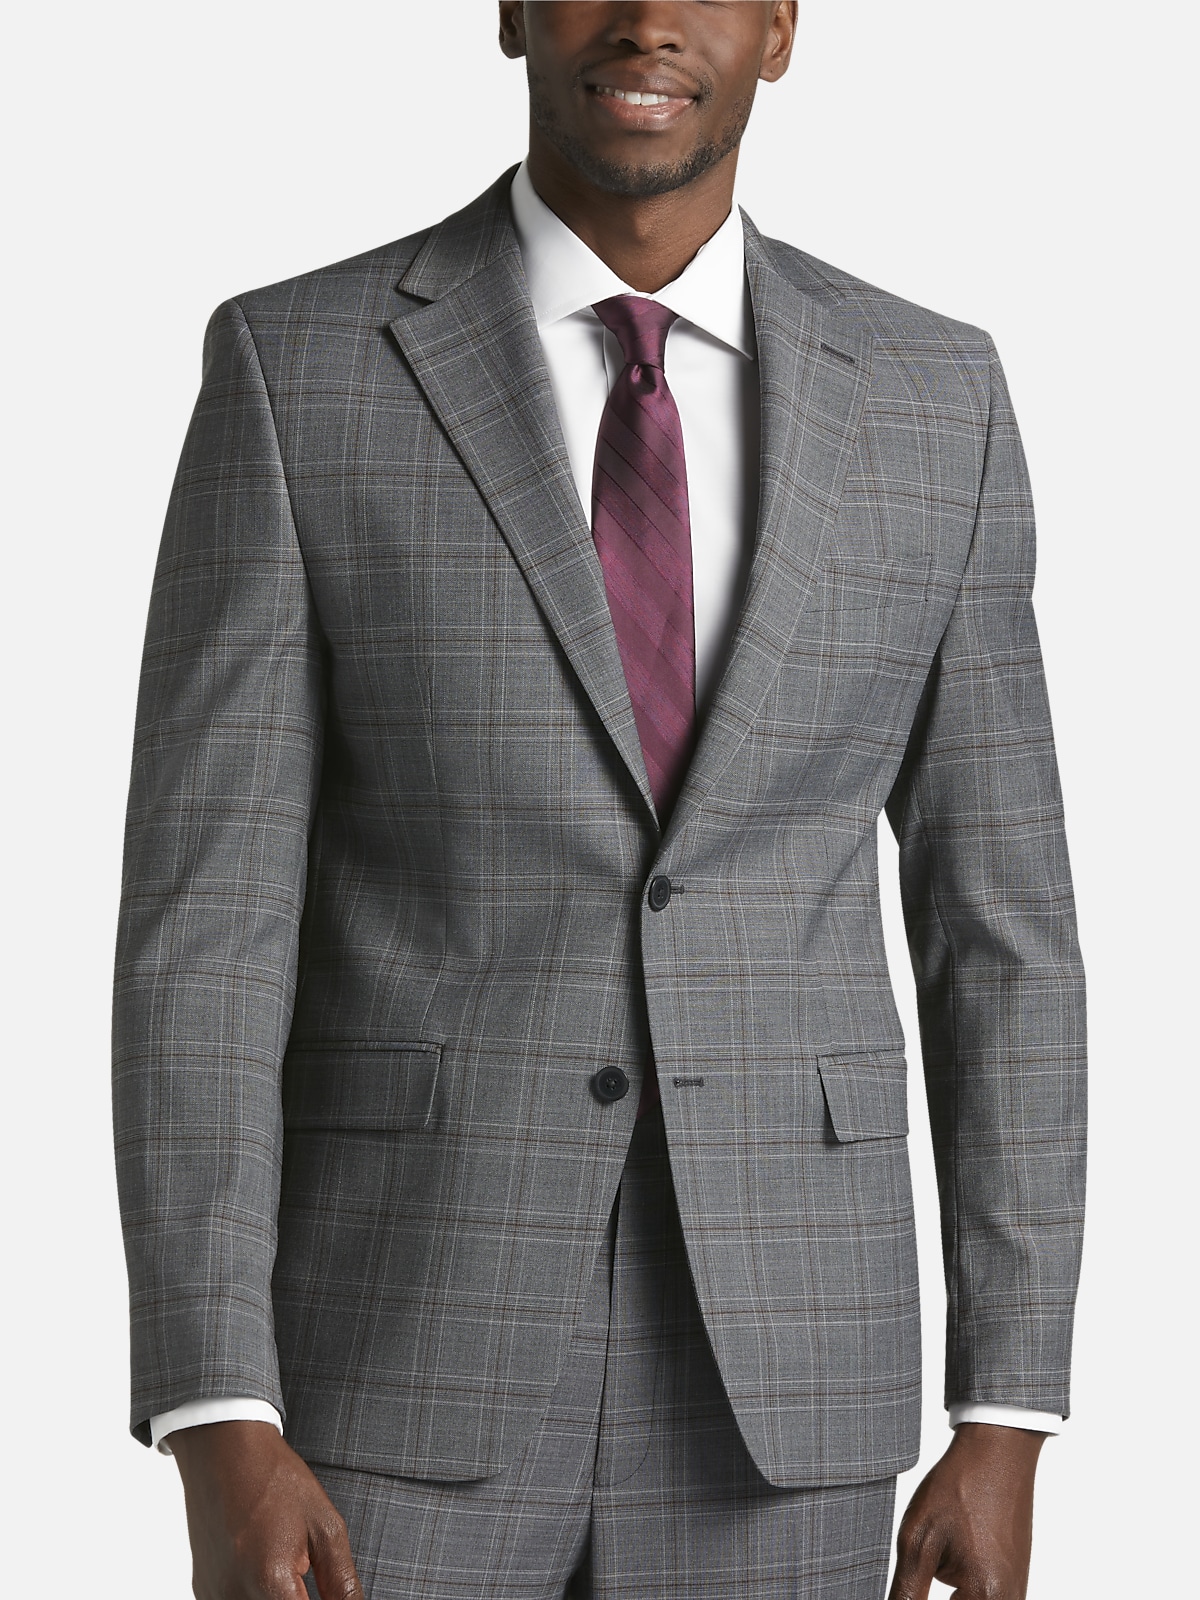 Michael Strahan Classic Fit Suit Separates Coat Plaid All Clothing Mens Wearhouse 